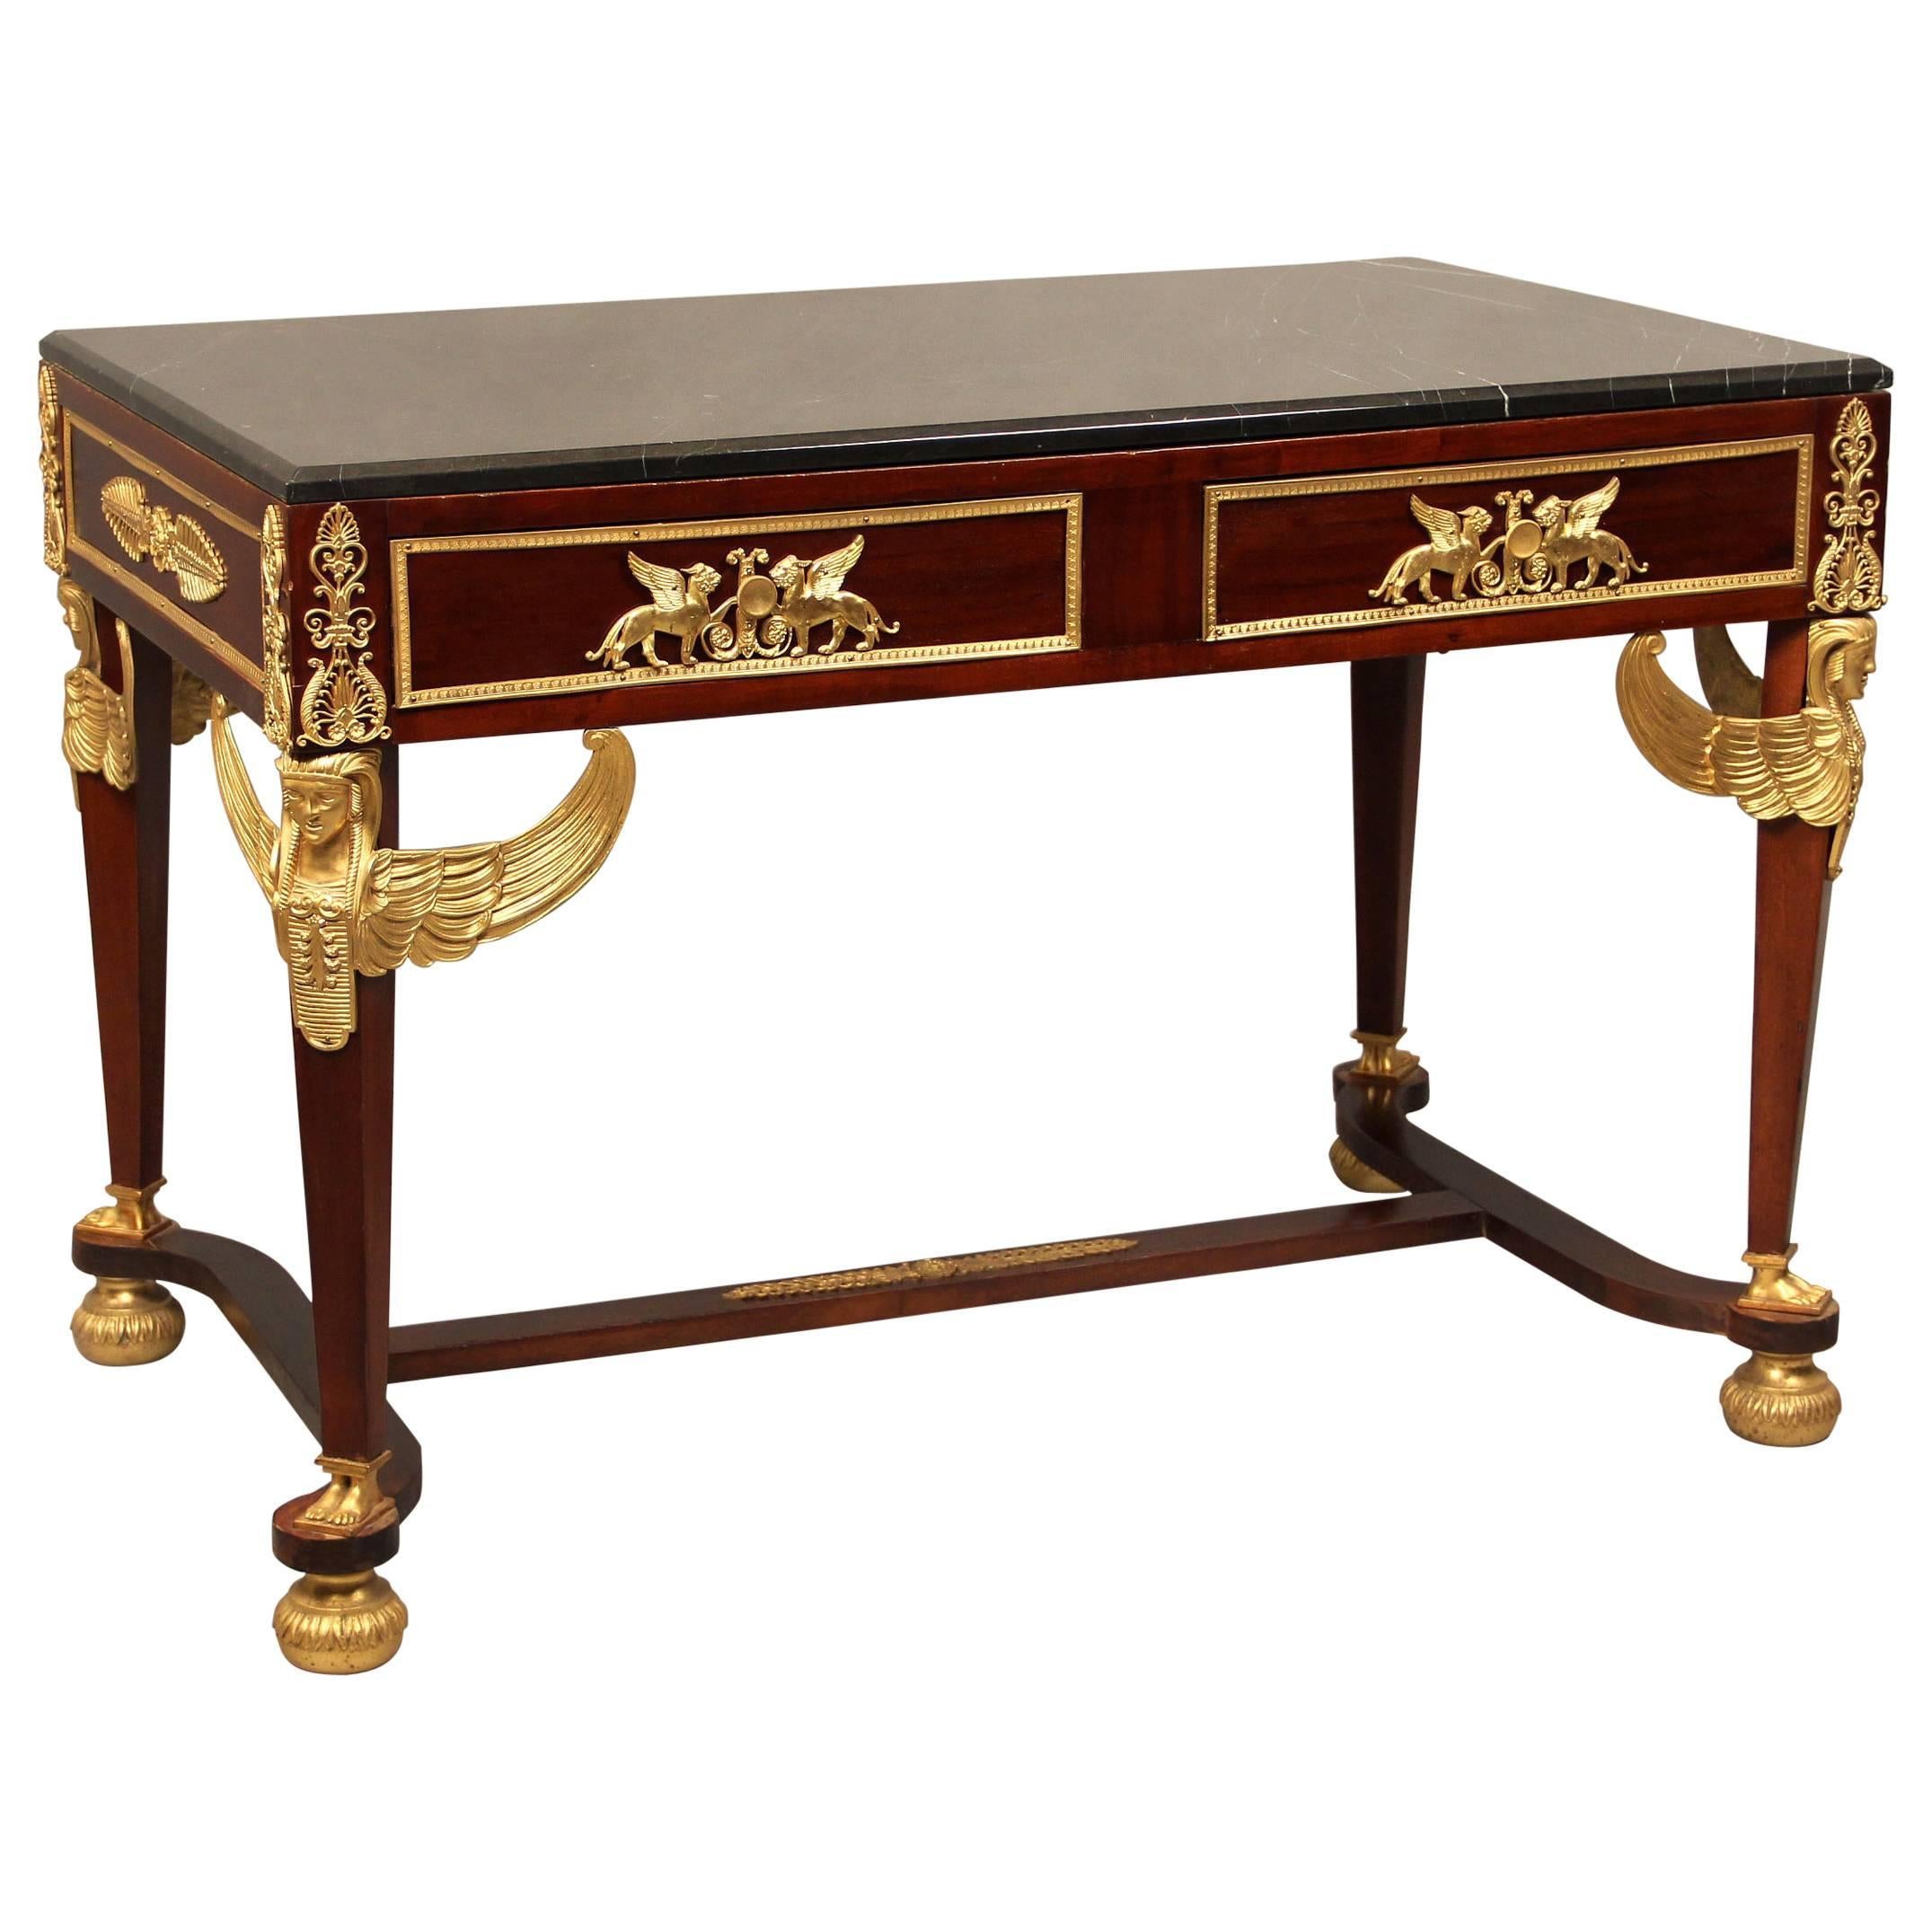 Late 19th Gilt Bronze-Mounted Center Table in the Empire Revival Style For Sale